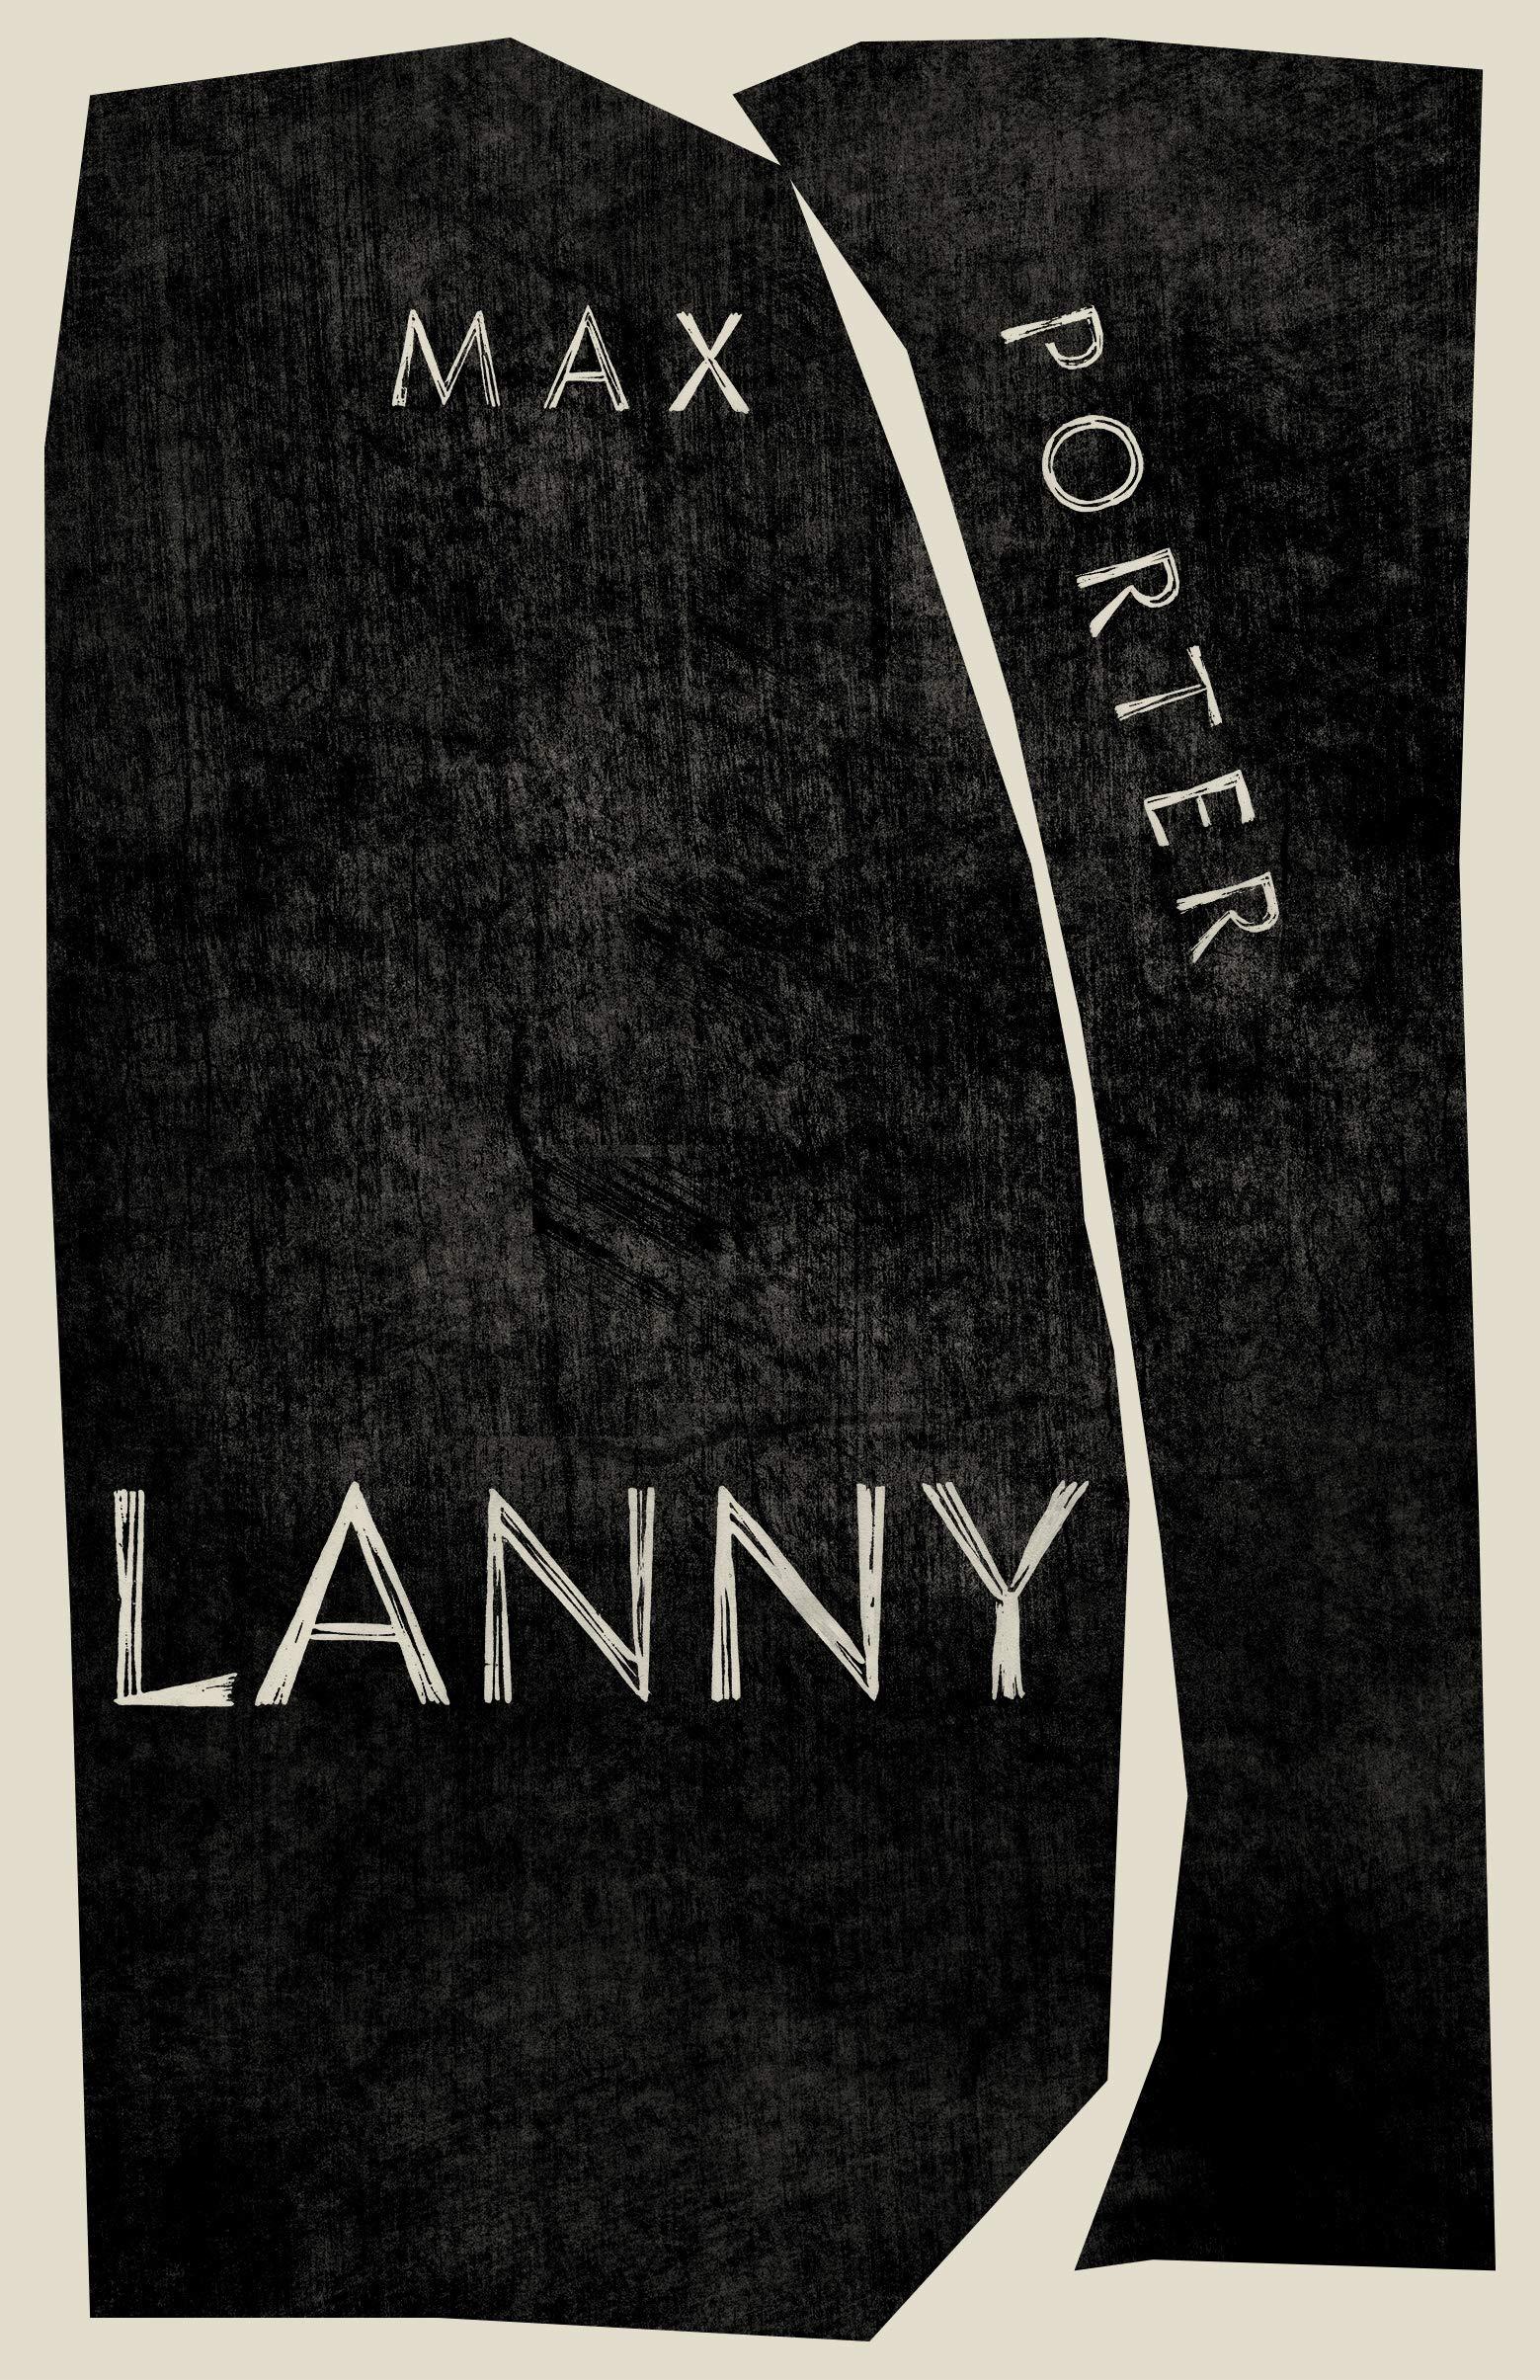 Lanny By Max Porter Review A Wonderful Piece Of Work - 